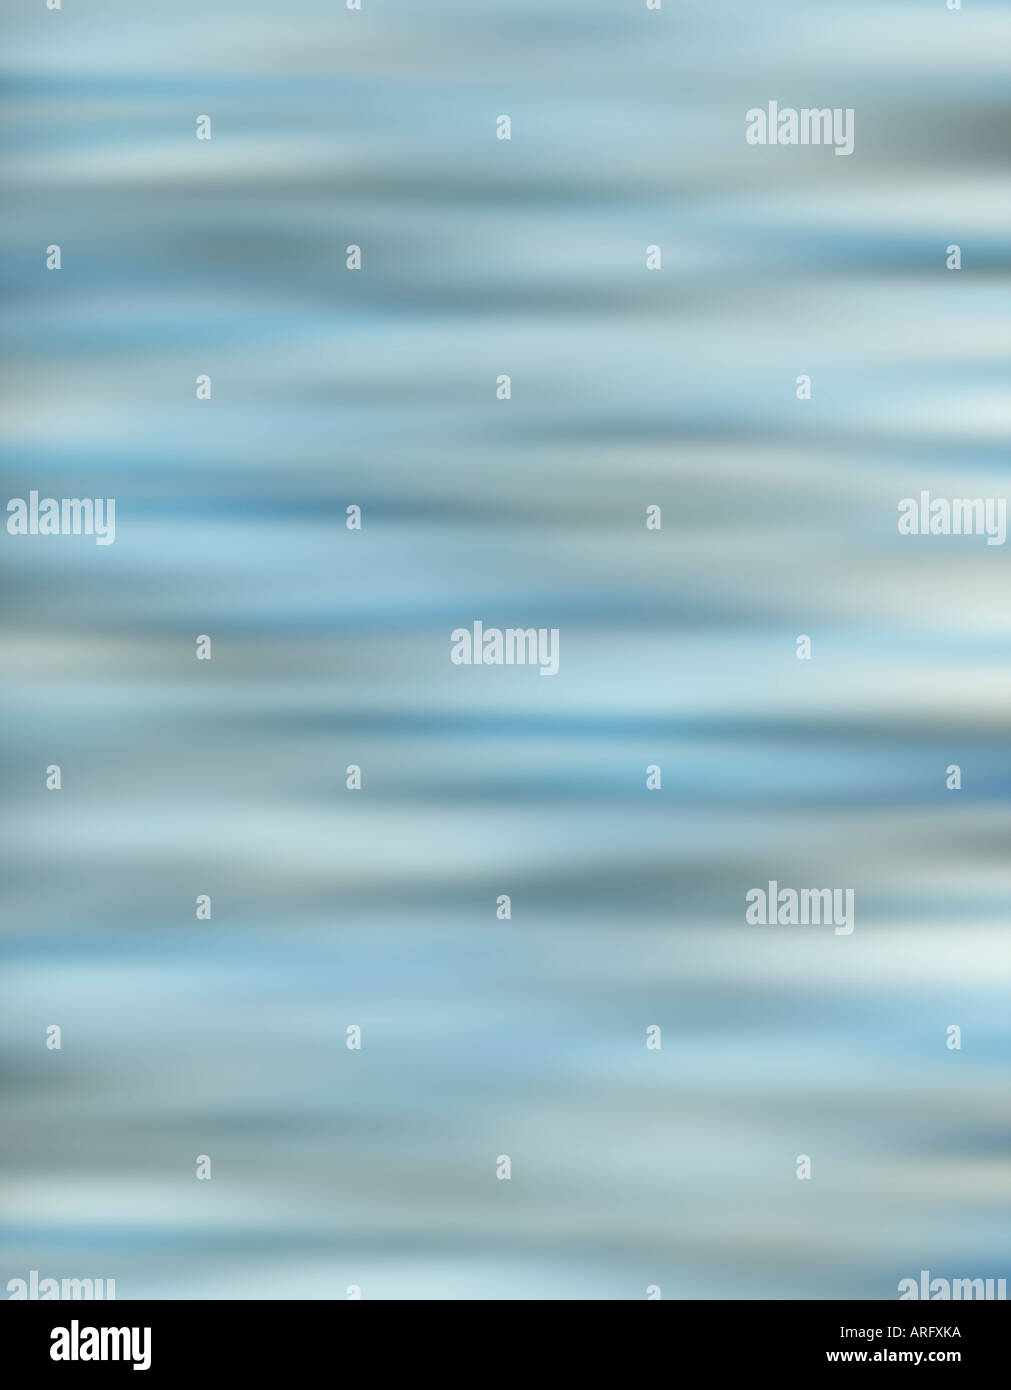 ABSTRACT BACKGROUND WITH BLUE RIPPLE PATTERN Stock Photo